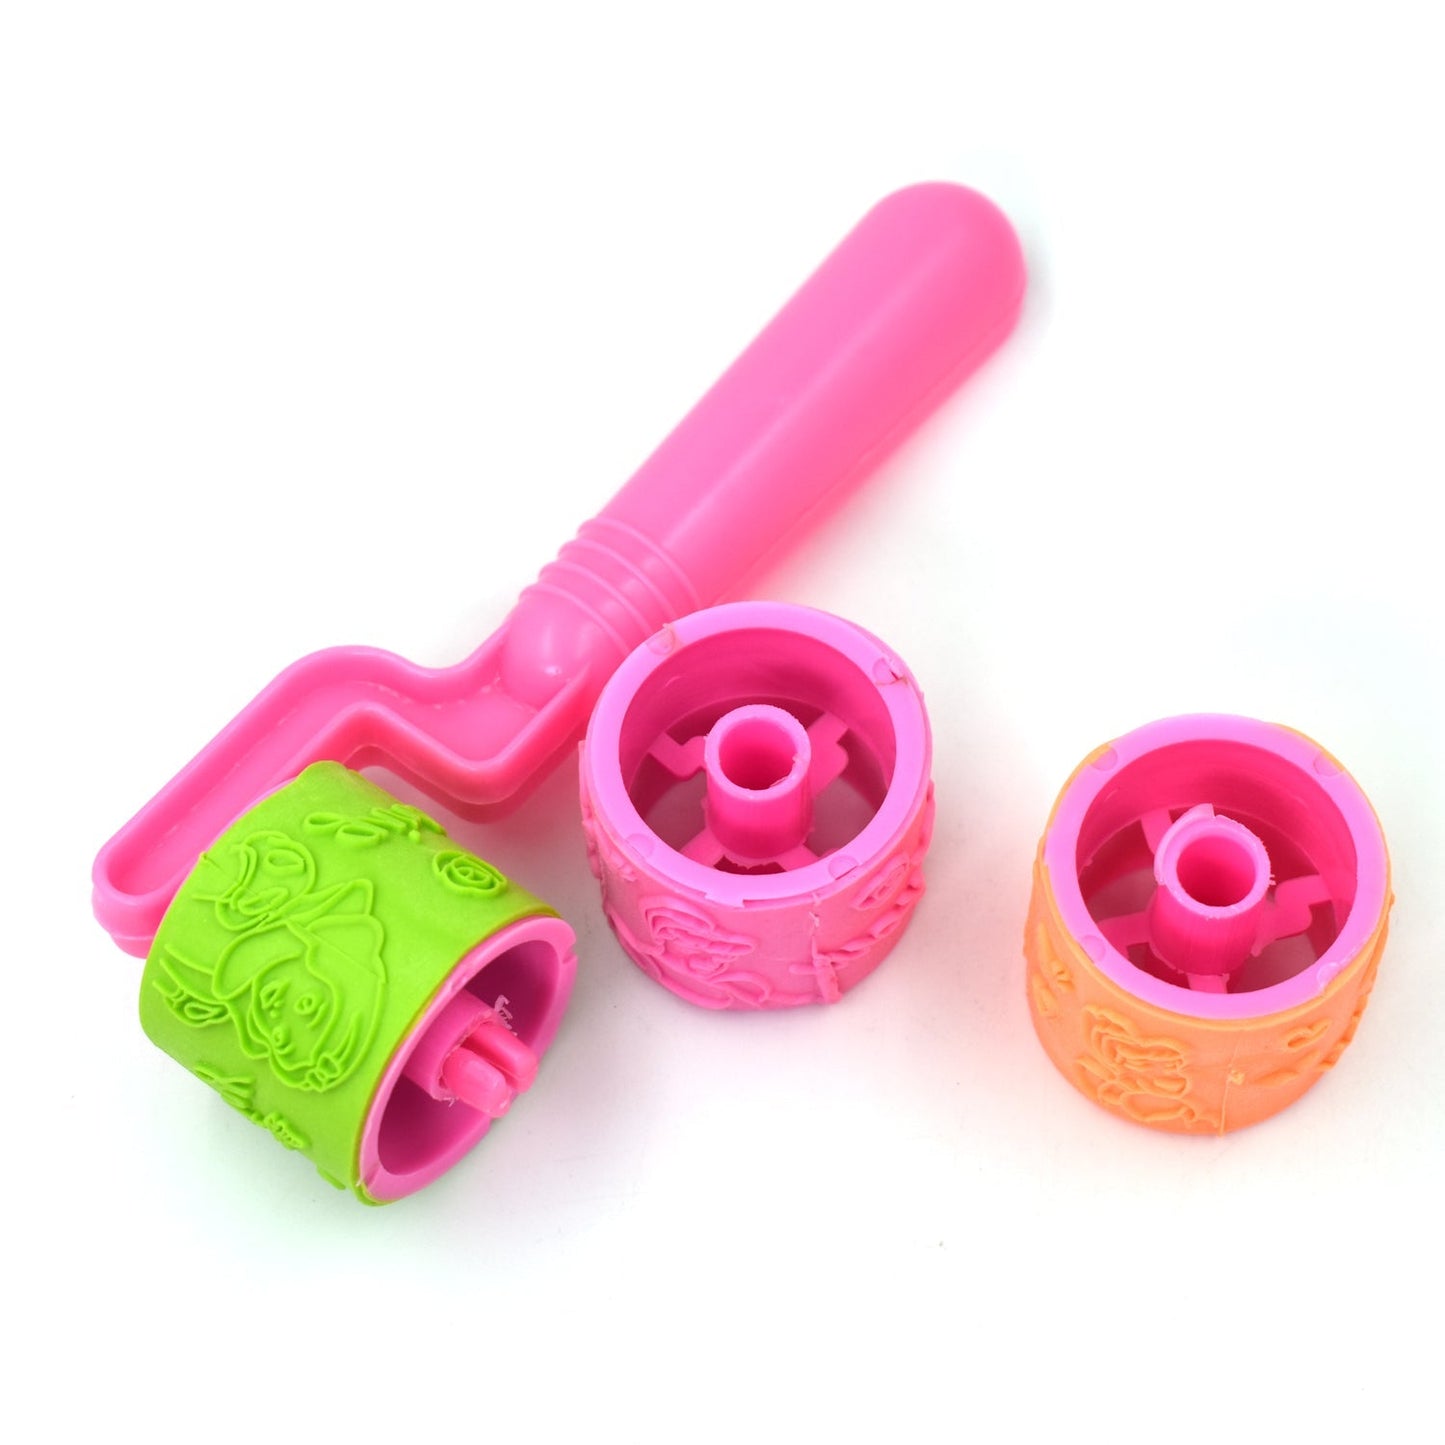 4801 Roller Stamp used in all types of household places by kids and children’s for playing purposes.